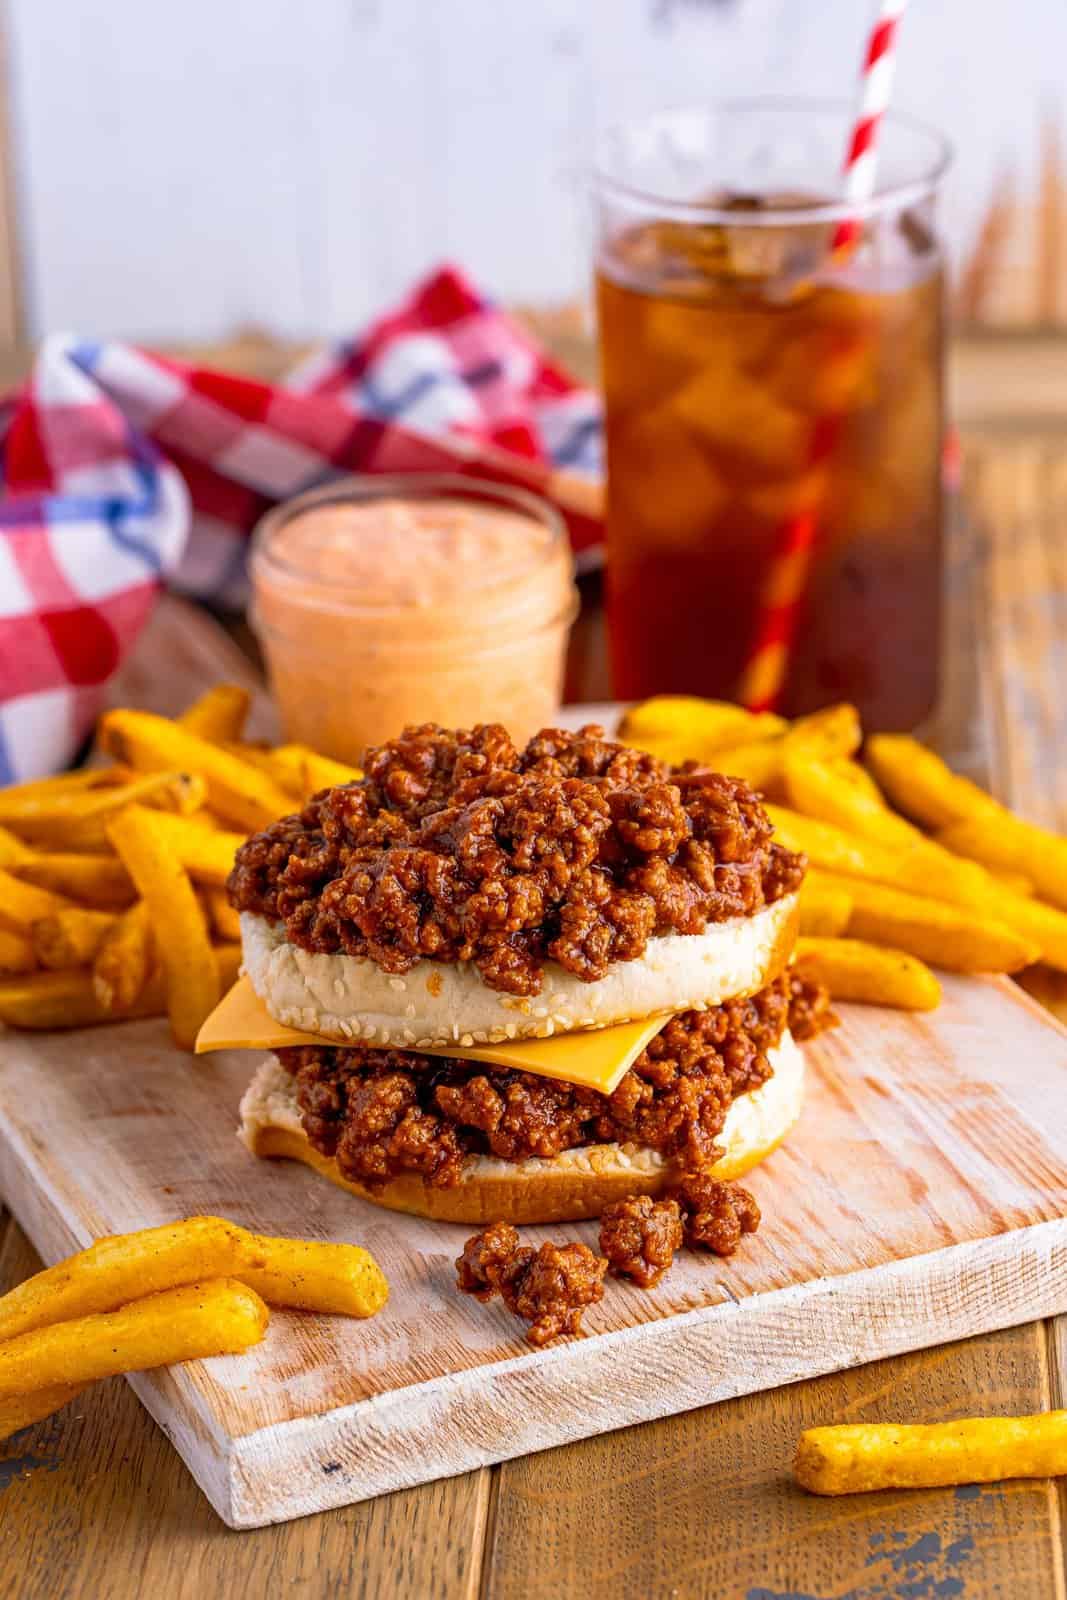 Part of a sloppy joe made with meat, sesame seed bottom buns, and cheese.